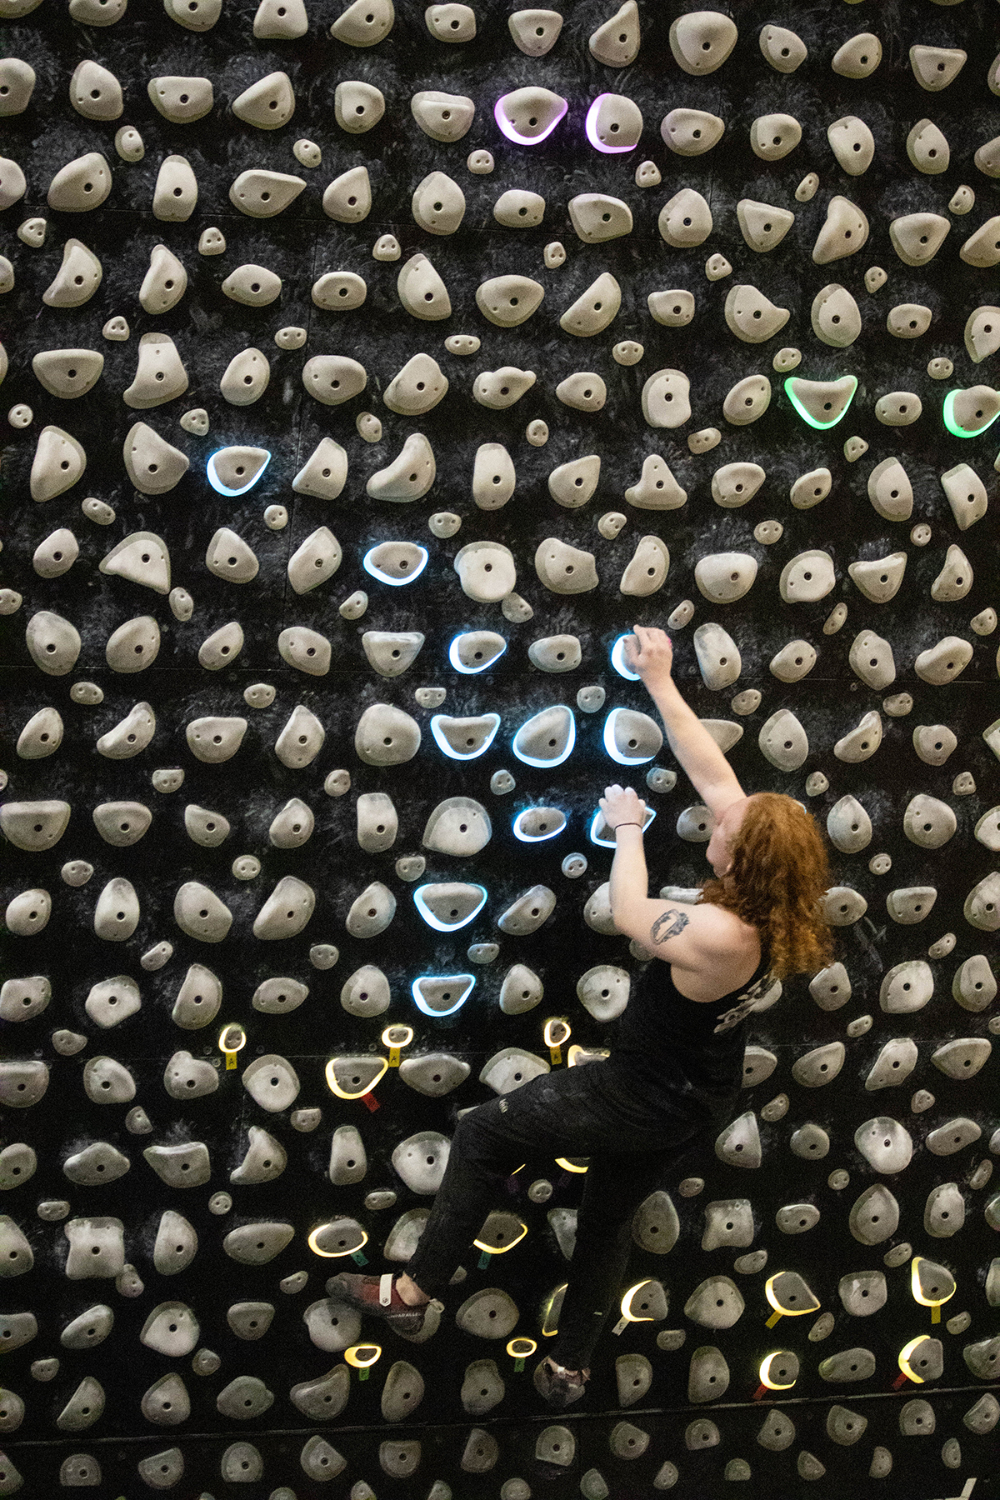 student with long red hair in black tshirt and pants climbs the climbing wall, some rocks are lit behind